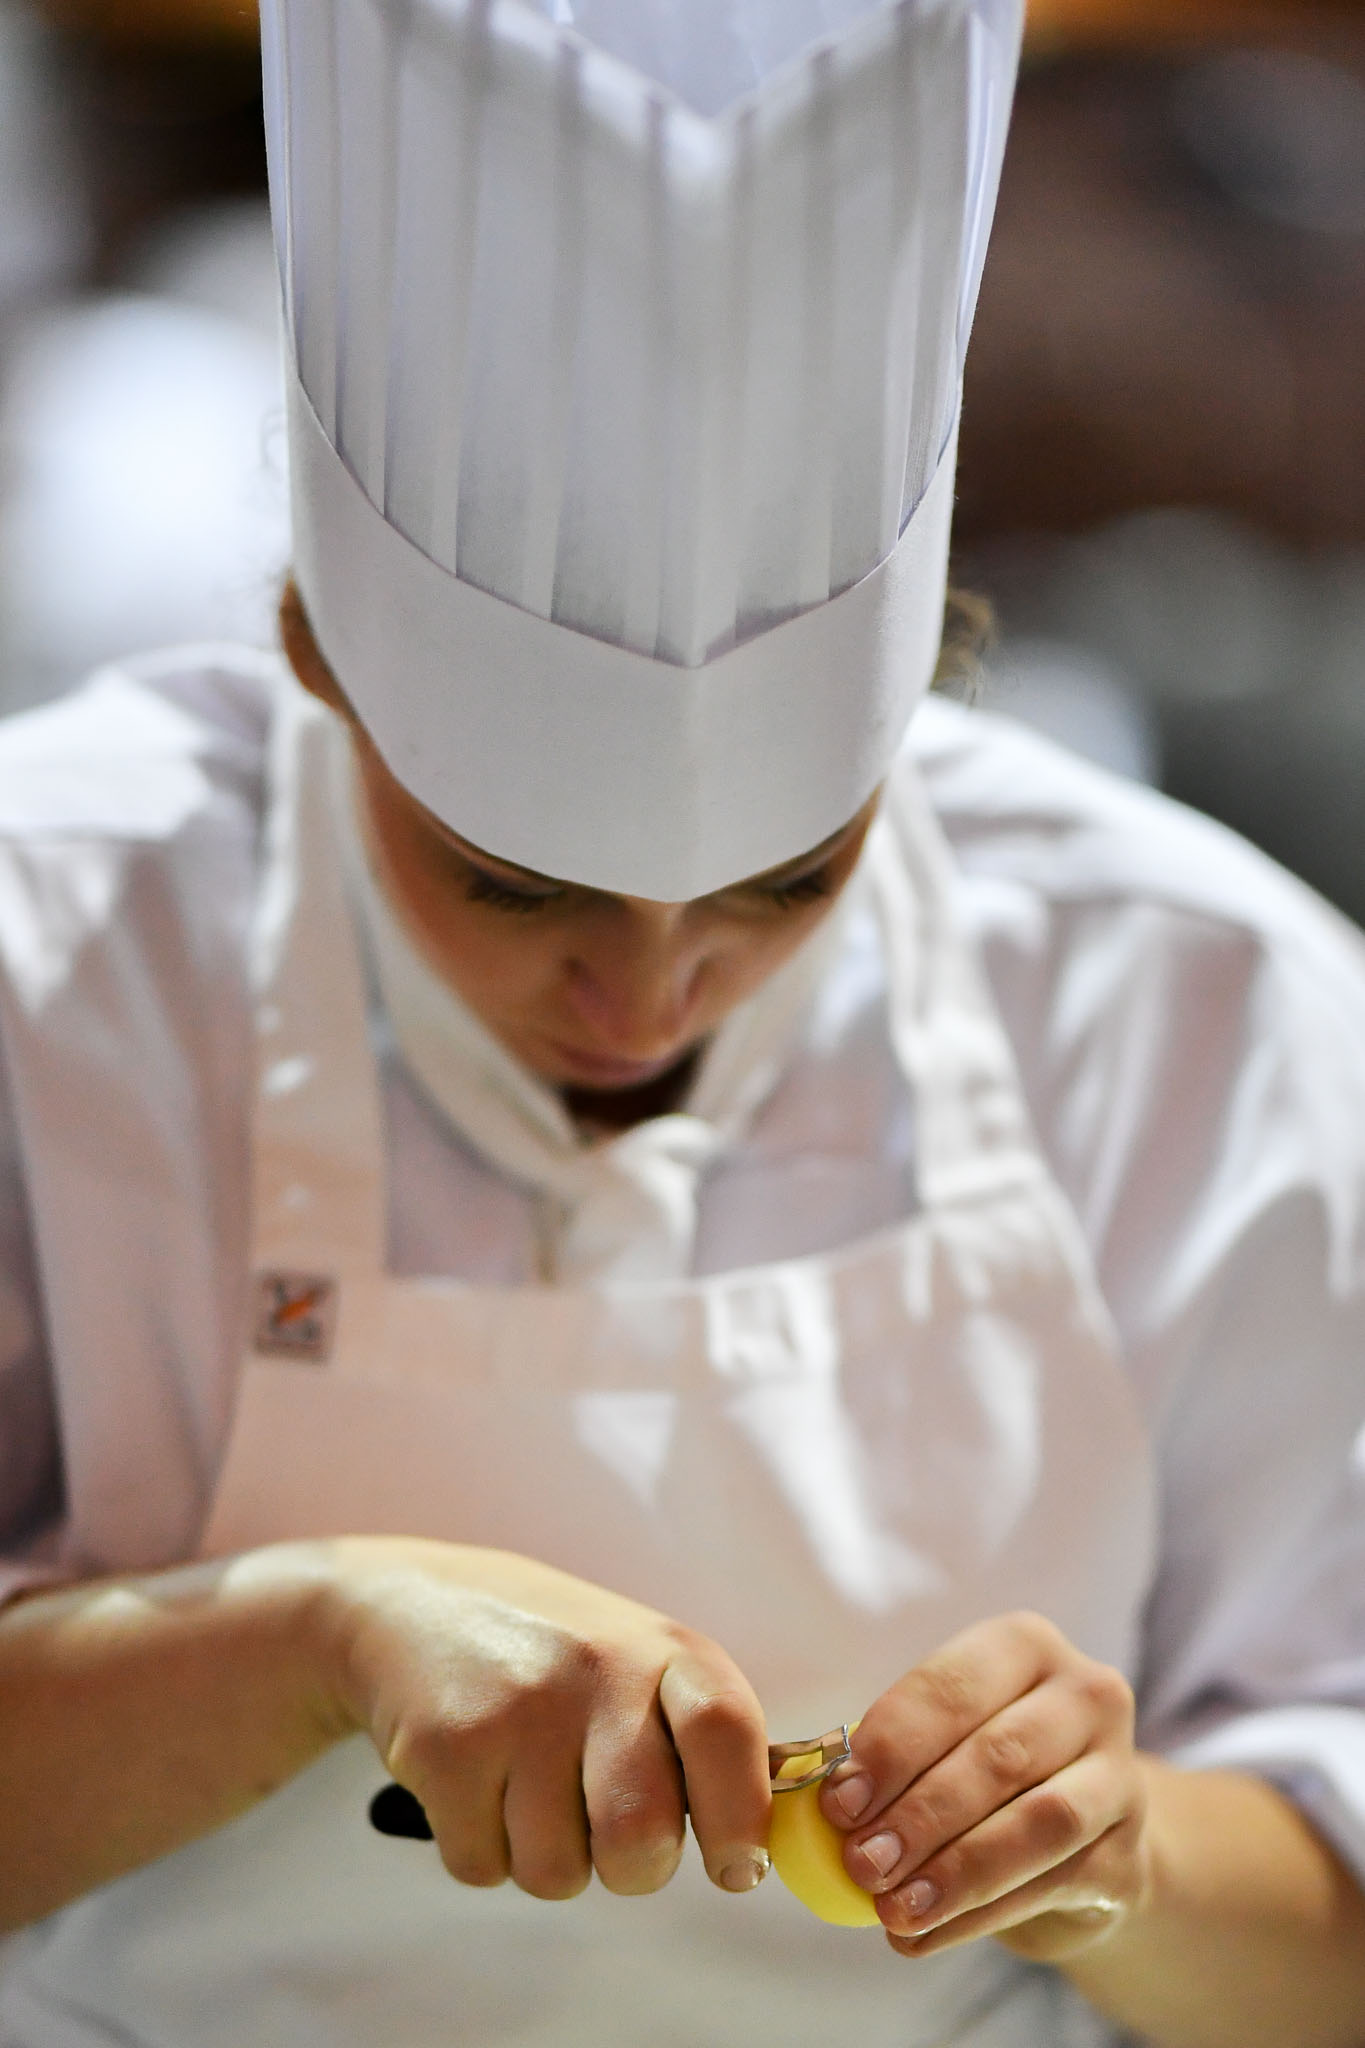 Melbourne, 30 May 2017 - Laura Skvor commis chef assisting Michael Cole of the Georgie Bass CafÈ & Cookery in Flinders prepares potatoes at the Australian selection trials of the Bocuse d'Or culinary competition held during the Food Service Australia show at the Royal Exhibition Building in Melbourne, Australia. Photo Sydney Low